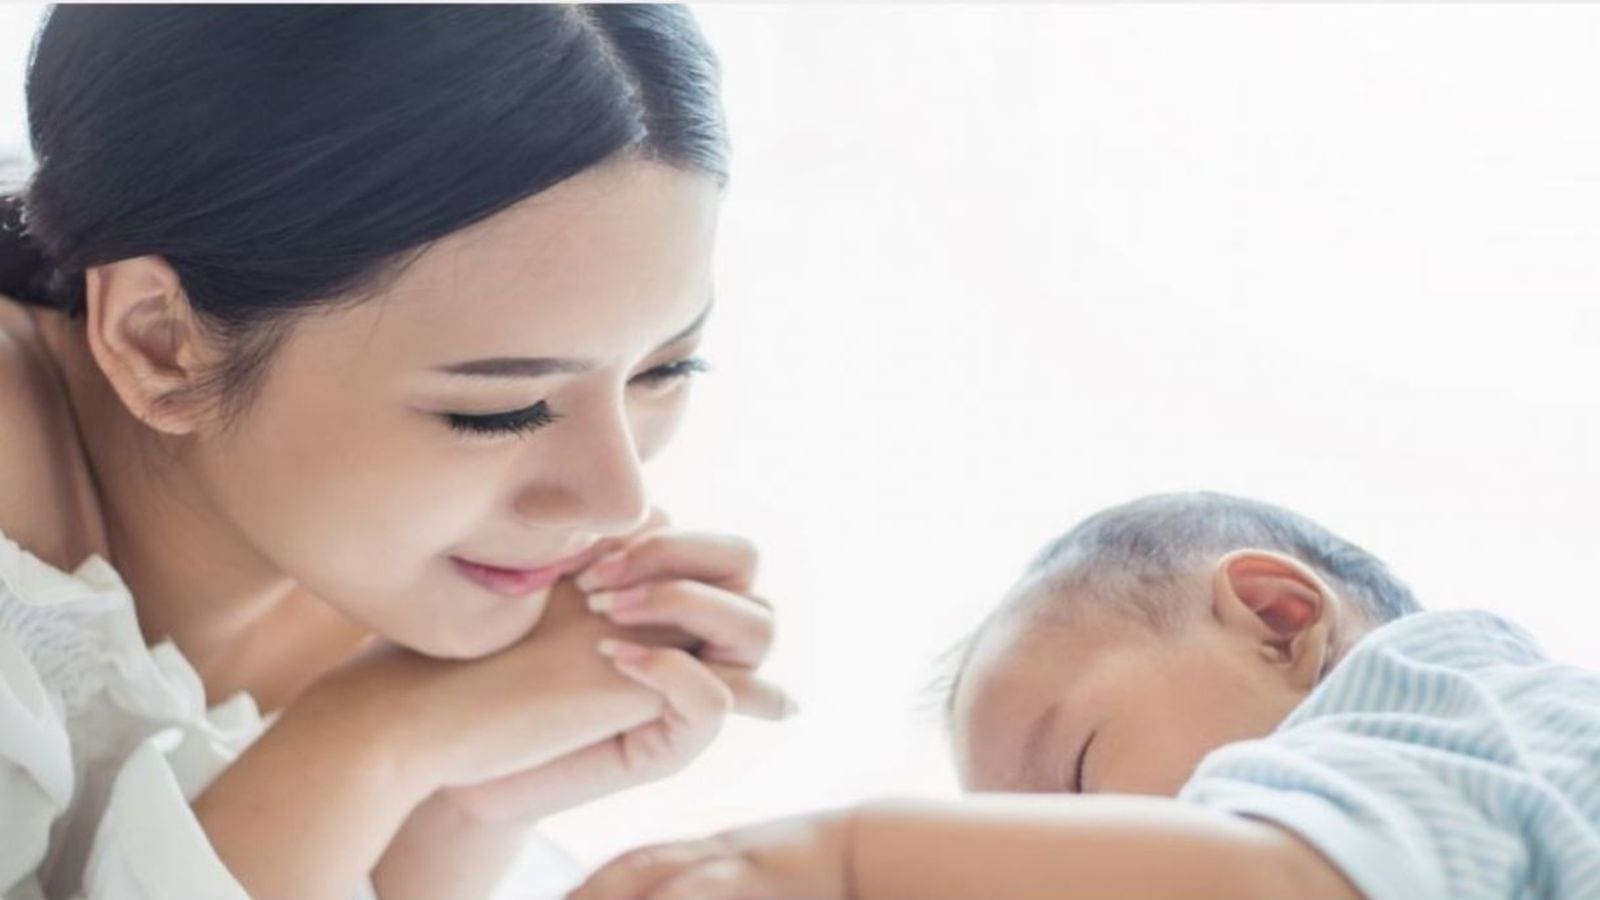 Bunge unveils infant formula ingredient that “mimics the fat composition of Chinese mother’s milk”